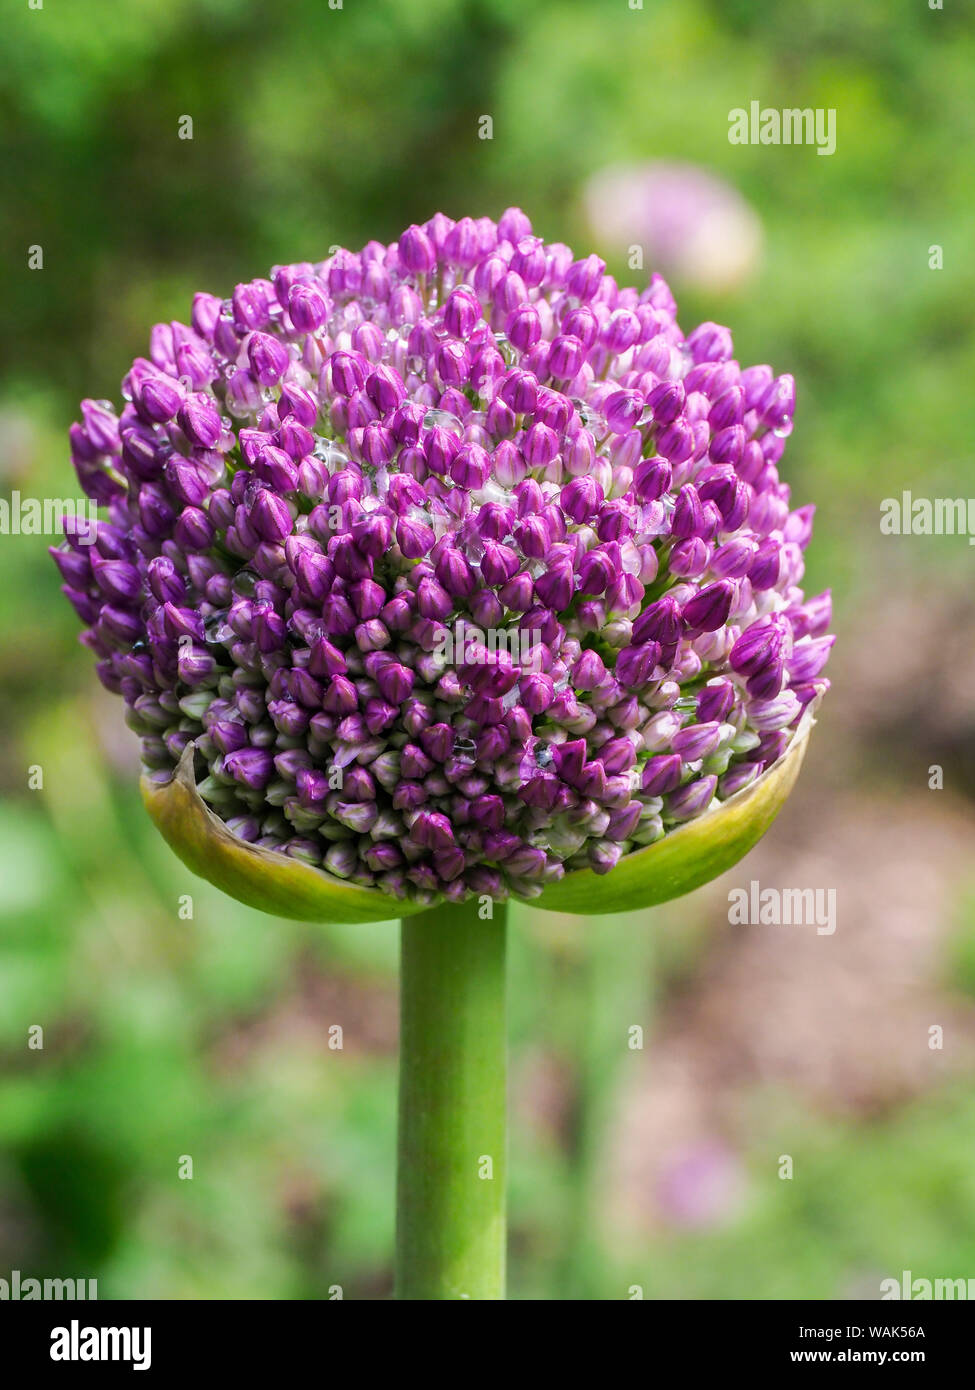 Close-up of an allium bud before it fully opens. Stock Photo